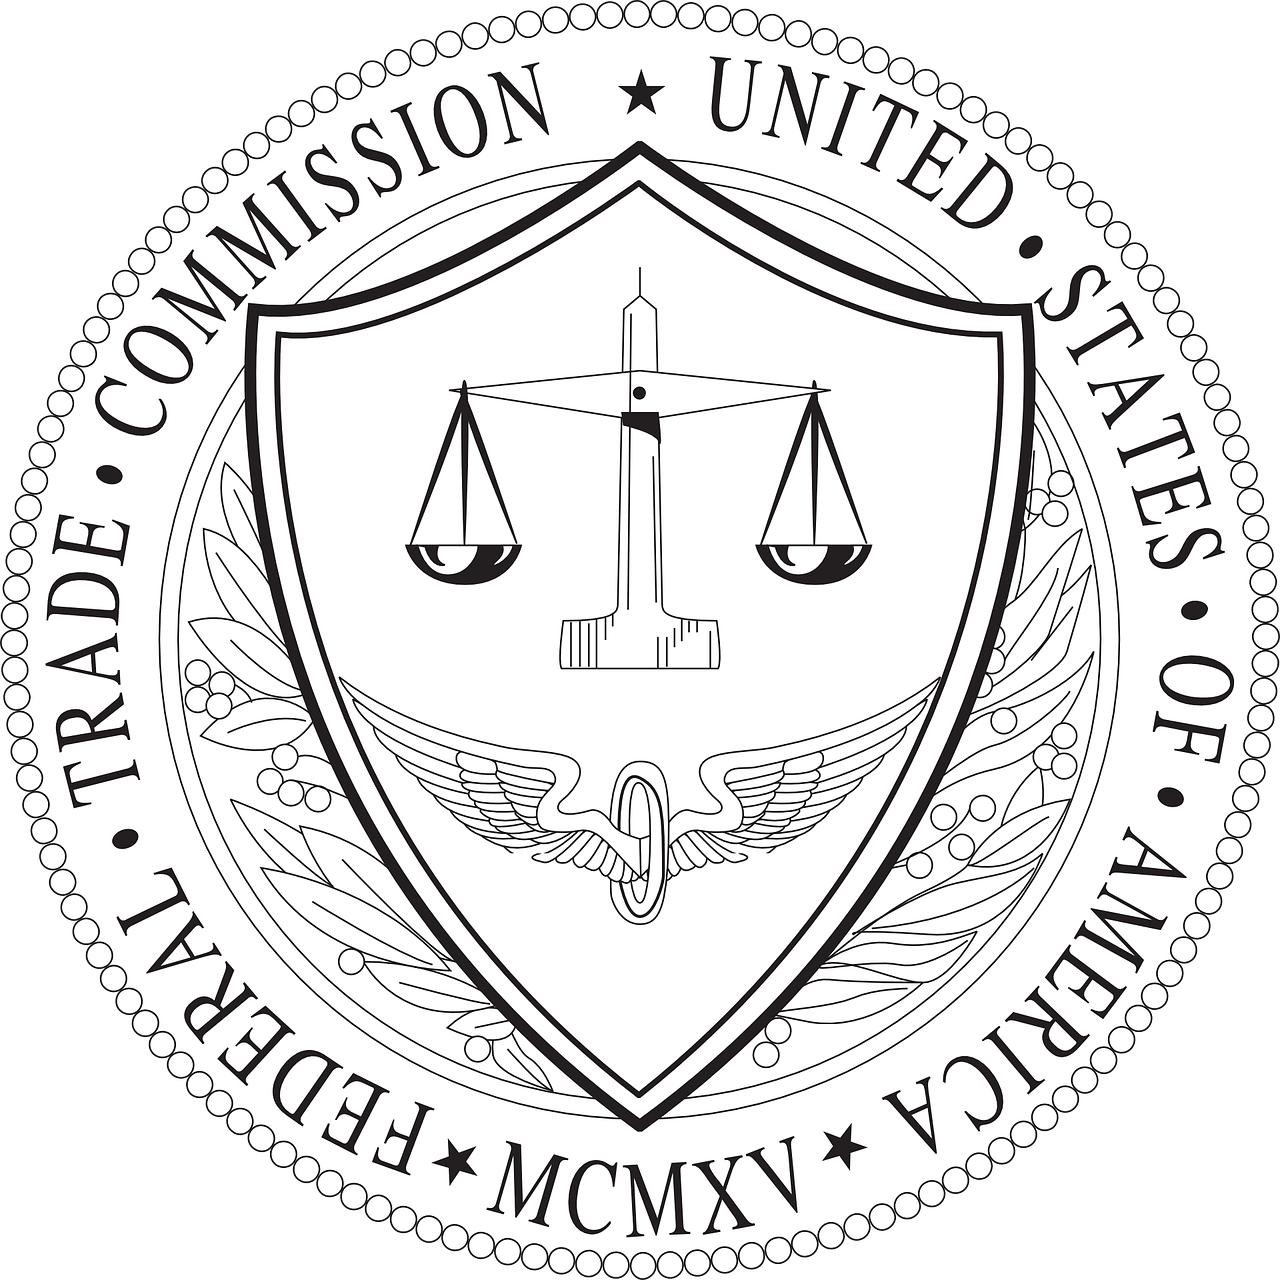 federal trade commission seal united states trade commission trade commission logo free photo